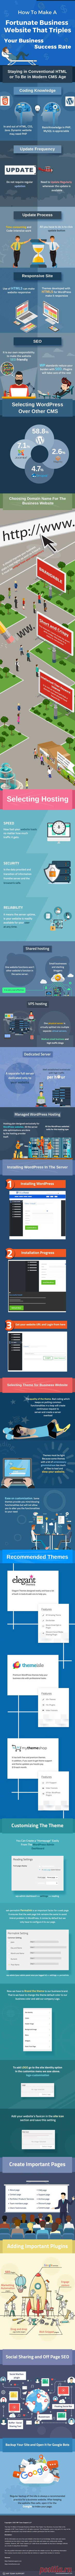 How to Make a Business Website That Triples Your Success Rate [Infographic] - Red Website Design Blog